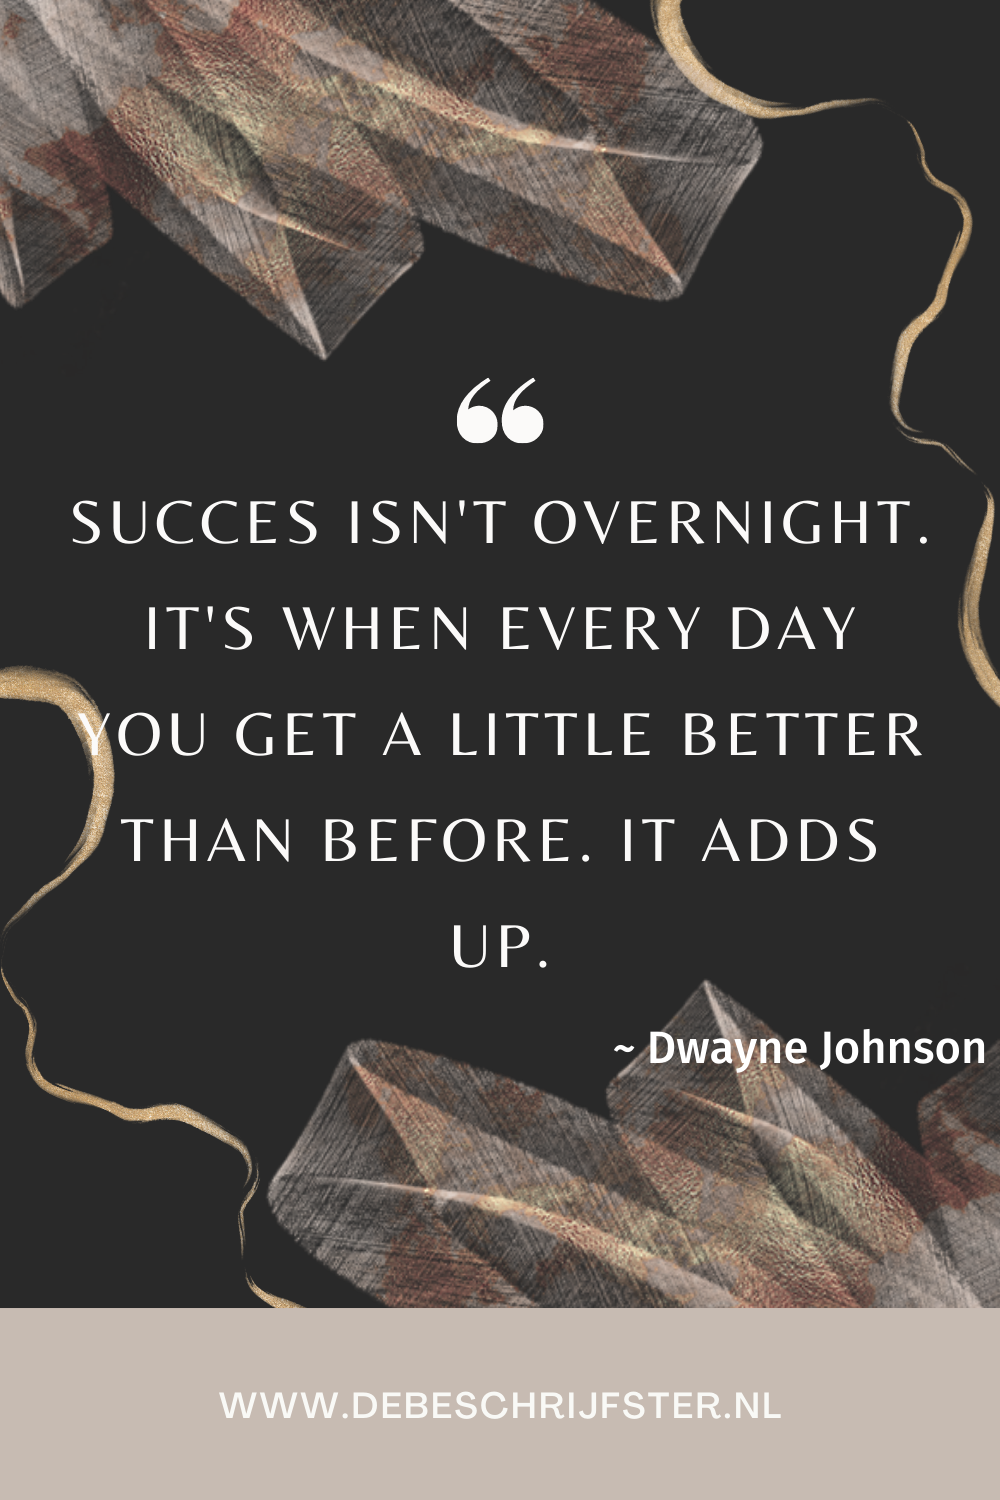 Success isn't overnight. It's when every day you get a little better than before. It adds up. Dwayne Johnson